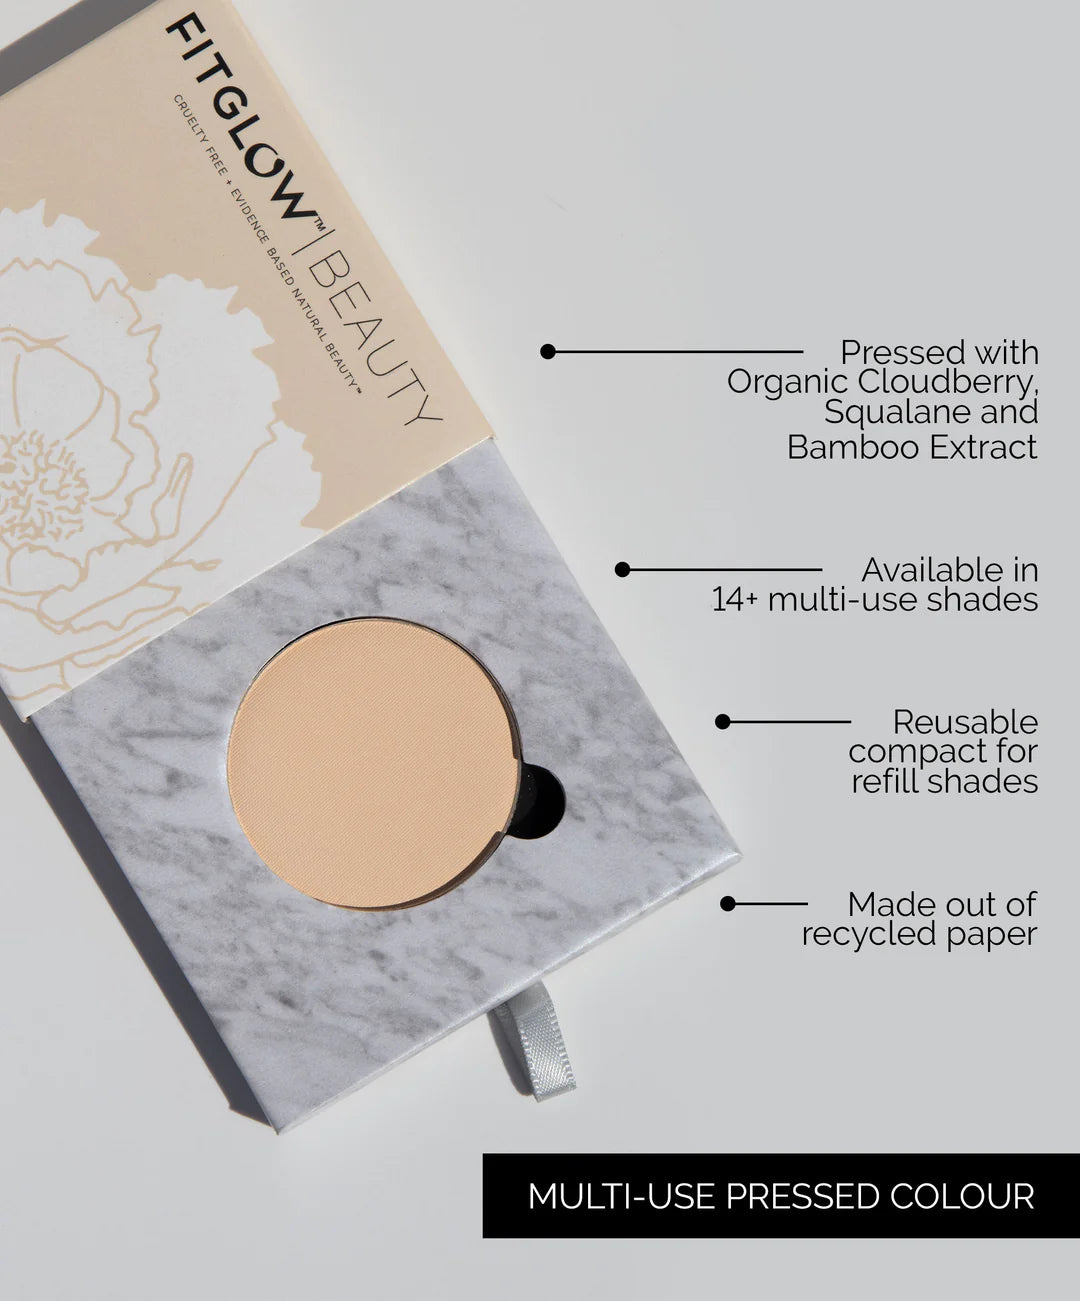 Fitglow beauty - multi use pressed shadow and blush colour - displayed in open packaging of foldable eyeshadow paper folding case for round palette with descriptions of the product to the right hand side.